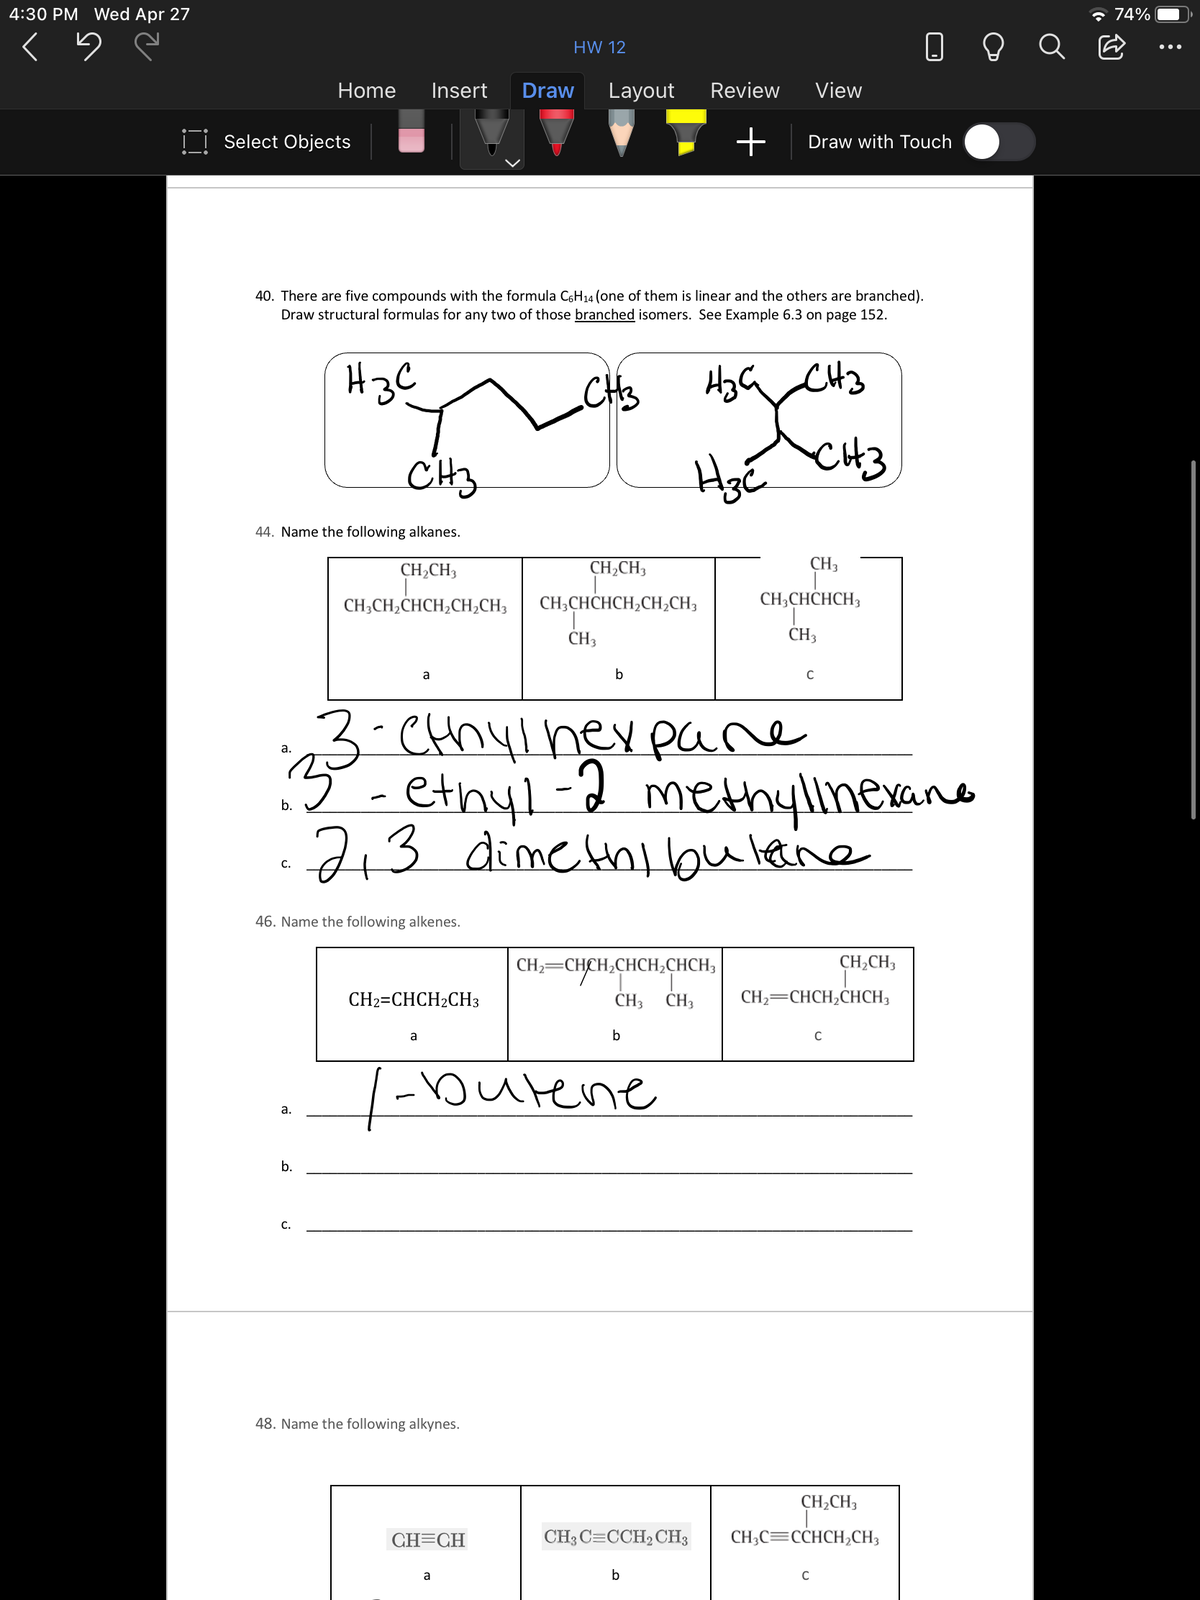 4:30 PM Wed Apr 27
* 74%
O O Q E
HW 12
Home
Insert
Draw
Layout
Review
View
I| Select Objects
Draw with Touch
40. There are five compounds with the formula C6H14 (one of them is linear and the others are branched).
Draw structural formulas for any two of those branched isomers. See Example 6.3 on page 152.
H3C
CH3
CH3
44. Name the following alkanes.
CH¿CH3
CH,CH3
CH3
CH;CH2CHCH2CH¿CH3
CH;CHCHCH,CH;CH3
CH;CHCHCH3
CH3
CH3
a
C
3-CHhylheypare
ethyl-2 methyllnexano
а.
7+3
dimethibulane
С.
46. Name the following alkenes.
CH2=CHCH,CHCH;CHCH3
CH2CH3
CH2=CHCH2CH3
CH3
CH3
CH2=CHCH2CHCH3
a
b
C
|burene
а.
b.
C.
48. Name the following alkynes.
CH,CH3
GH=CH
CH3 C=CCH2CH3
CH;C=CCHCH,CH3
a
b
C
